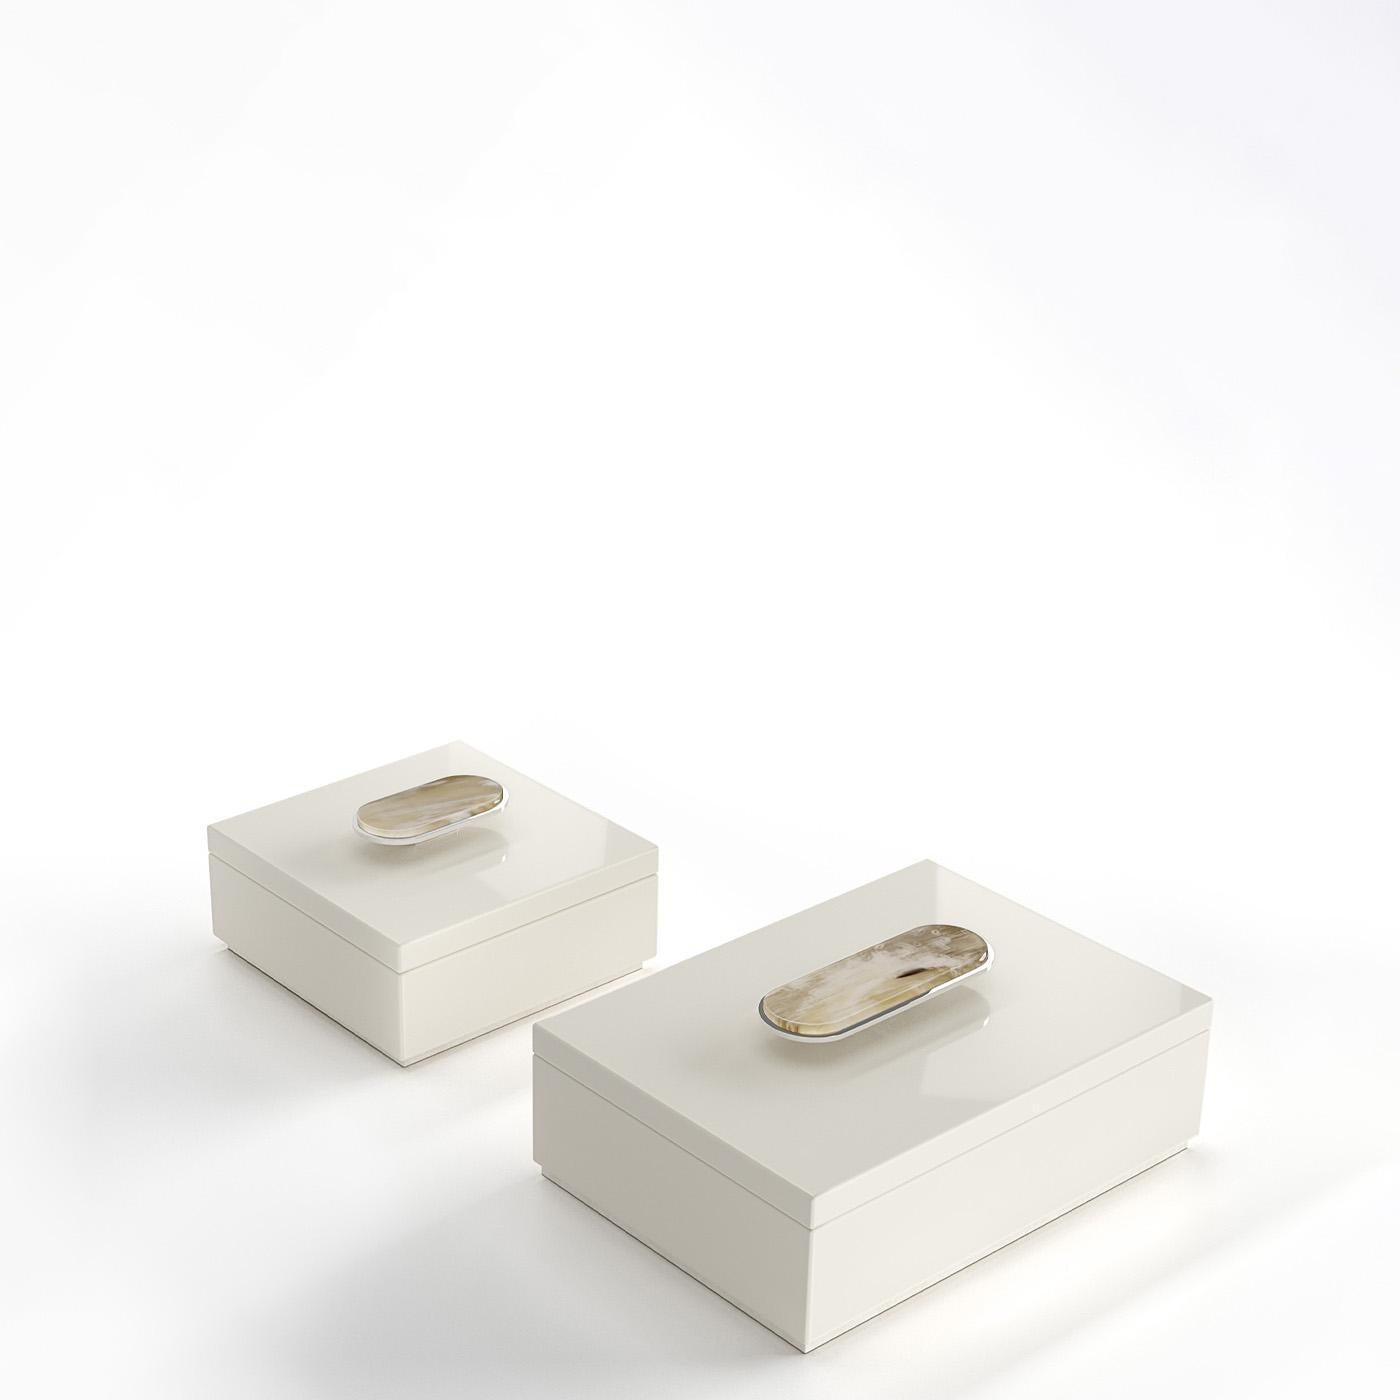 The Priora box is a versatile and elegant accessory, crafted to store your cherished items with the utmost care. Fashioned from glossy ivory lacquered wood, the box is distinguished by the detail in Corno Italiano and chromed brass on the lid,